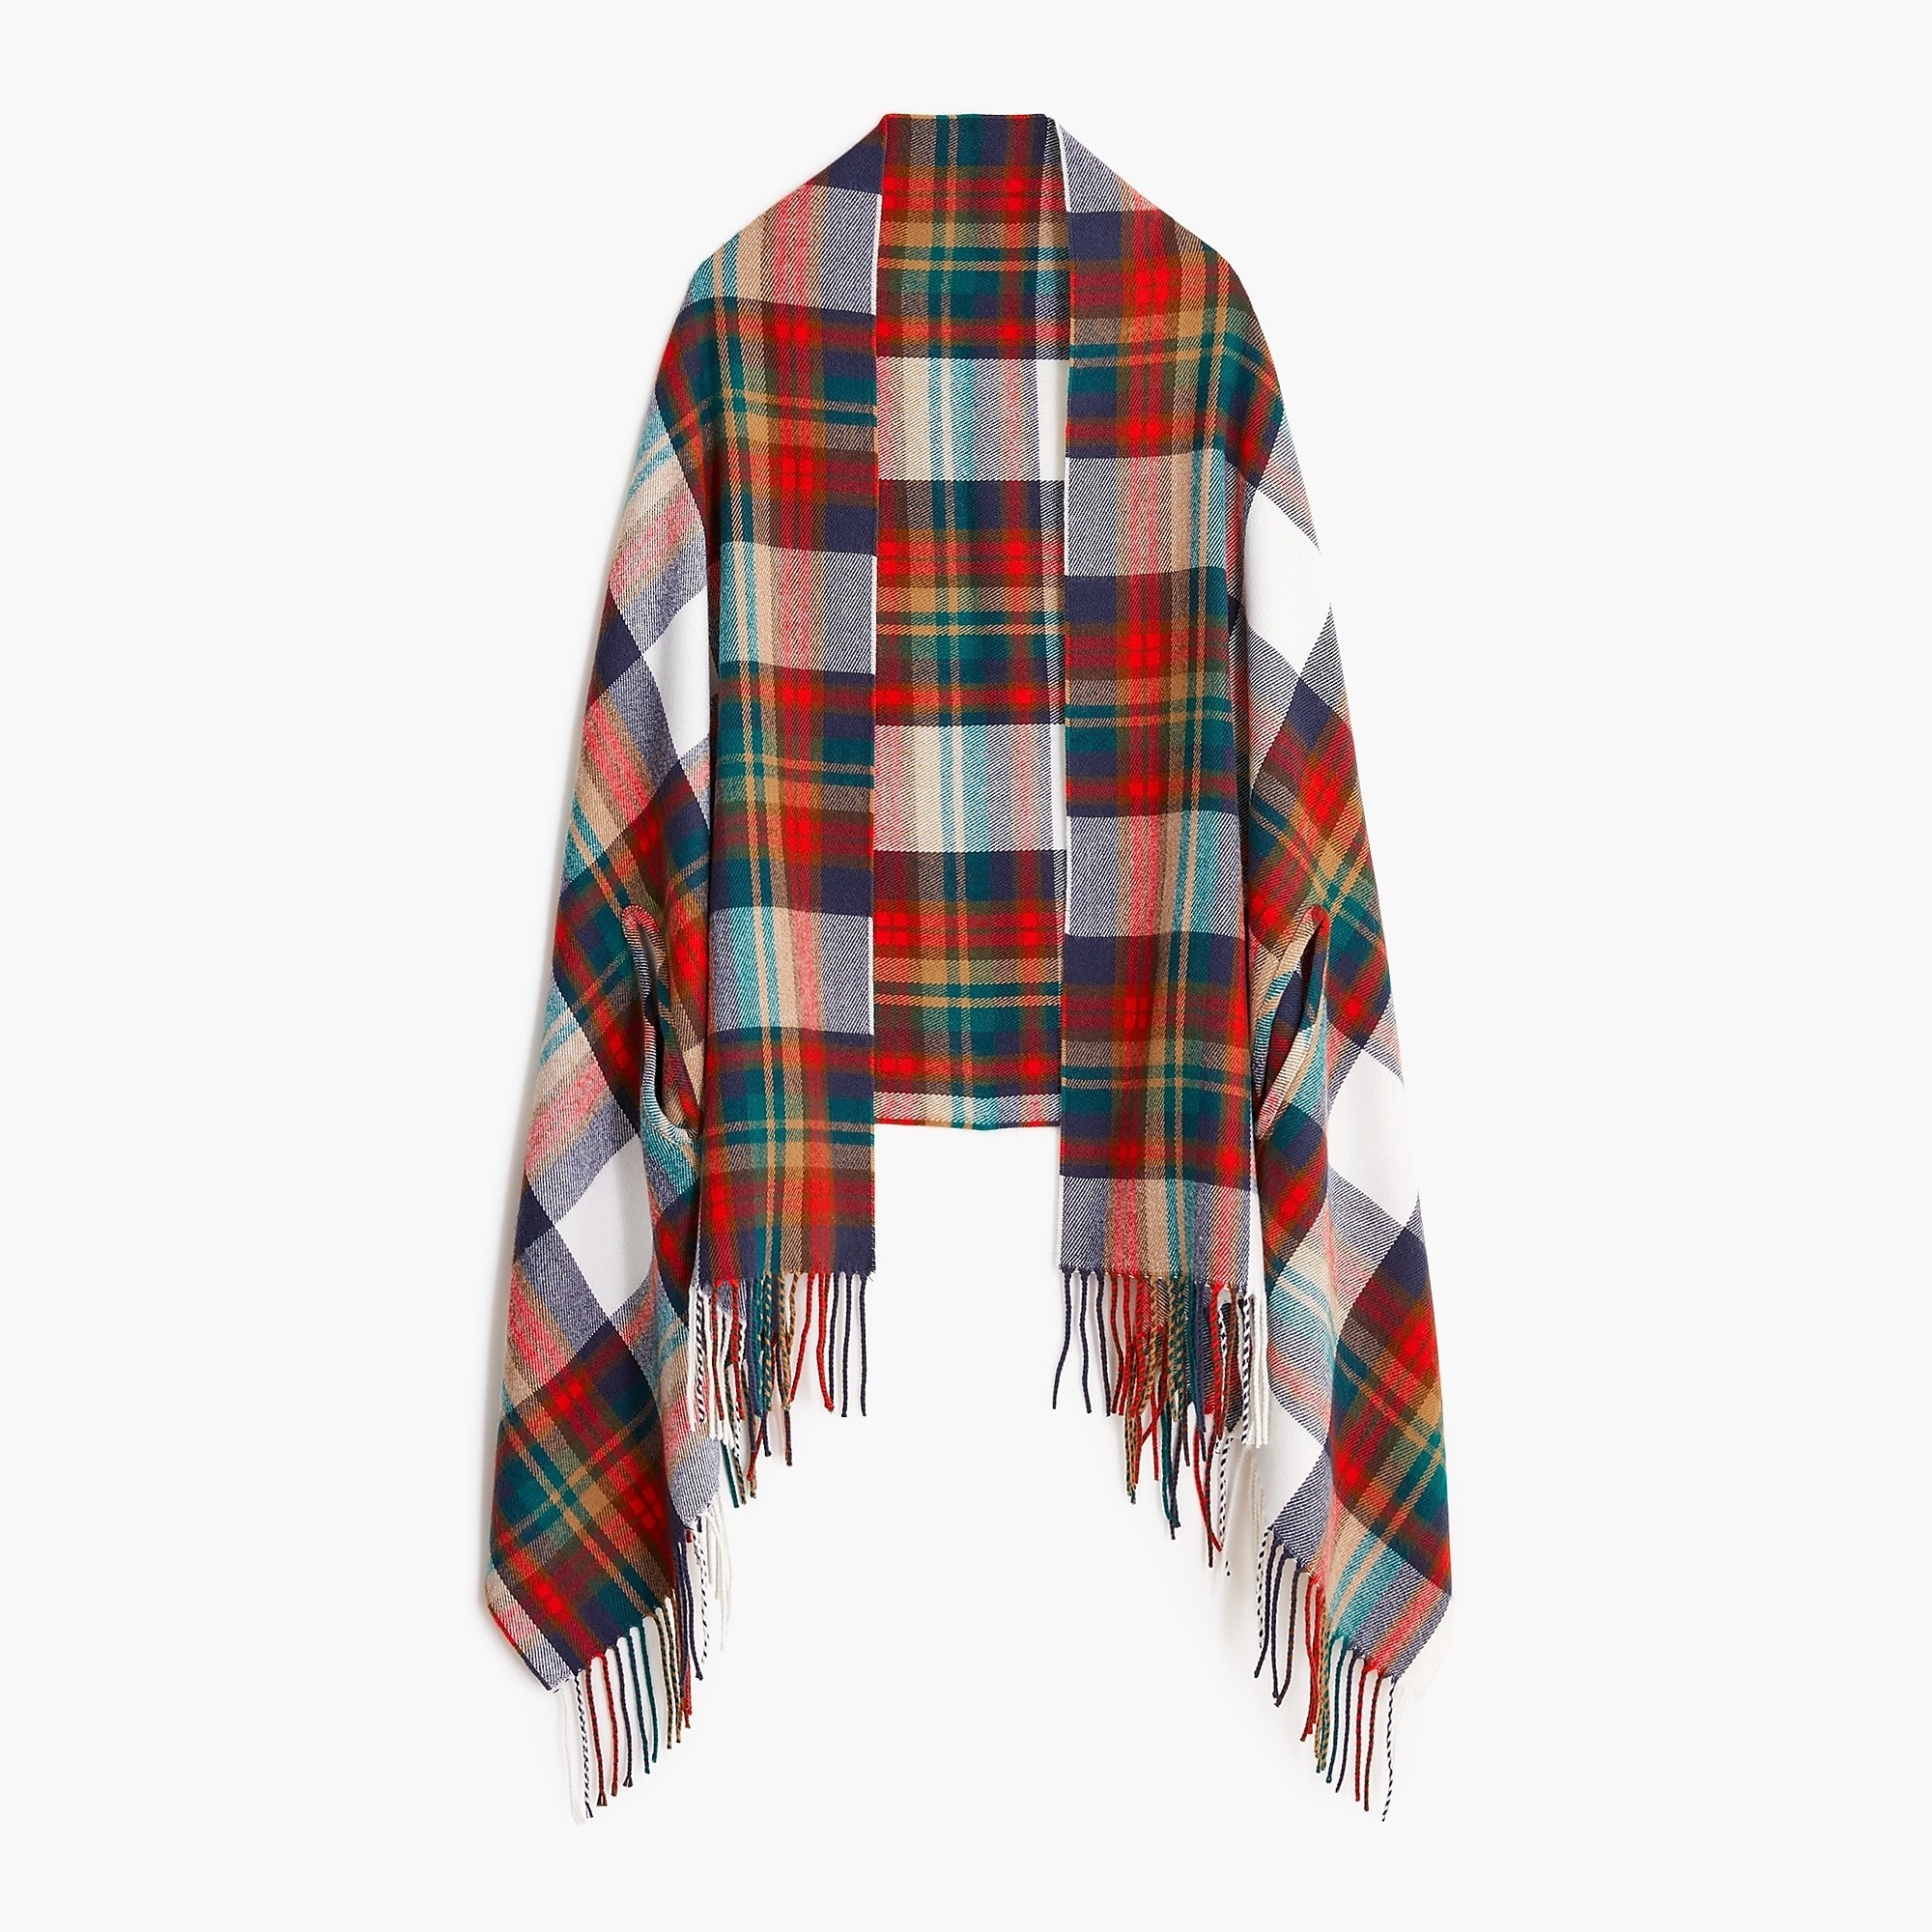 a plaid scarf with brown, blue, yellow, green and red